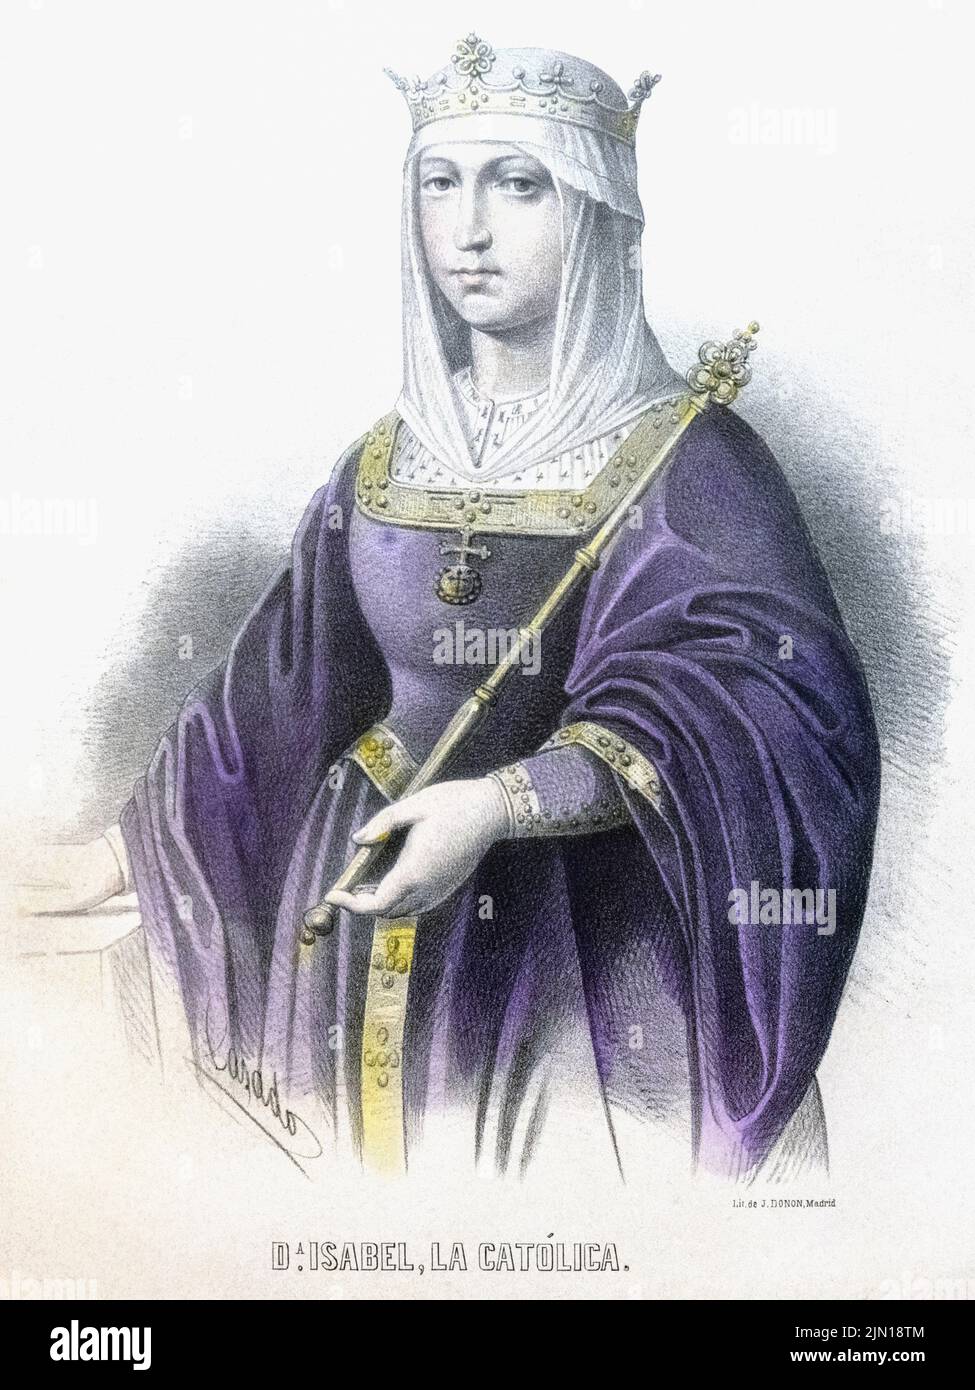 Isabella the Catholic, Isabel la Católica, 1451 - 1504. Queen of Castile and of Aragon.  After a 19th century print. Stock Photo